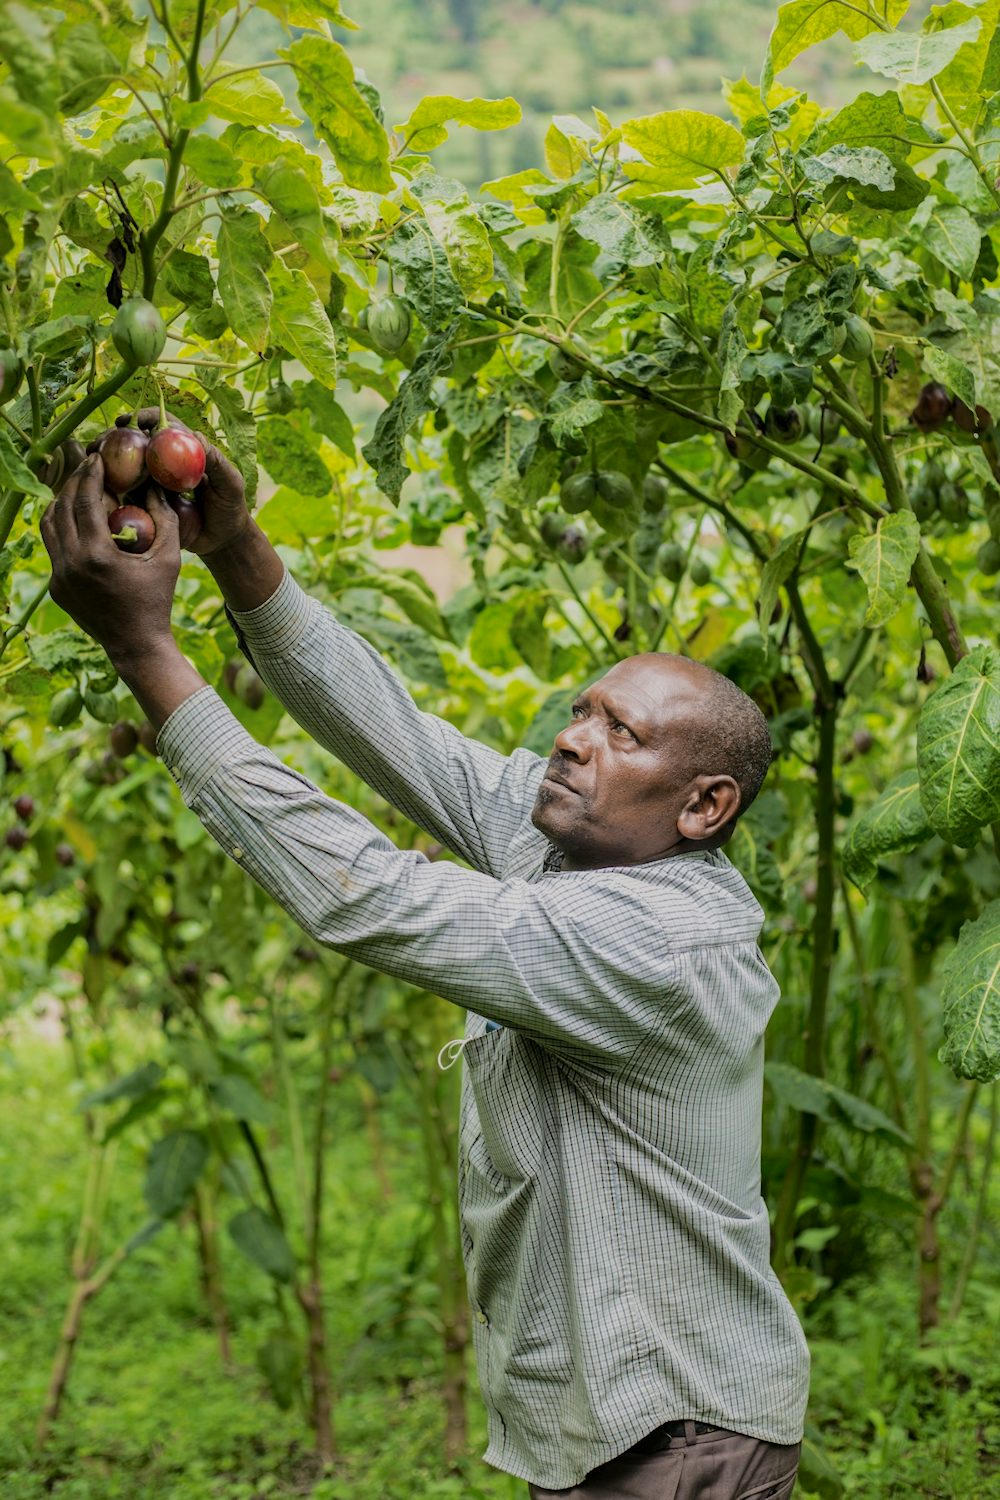 A man reaches up to a tree's branches to harvest fruit.